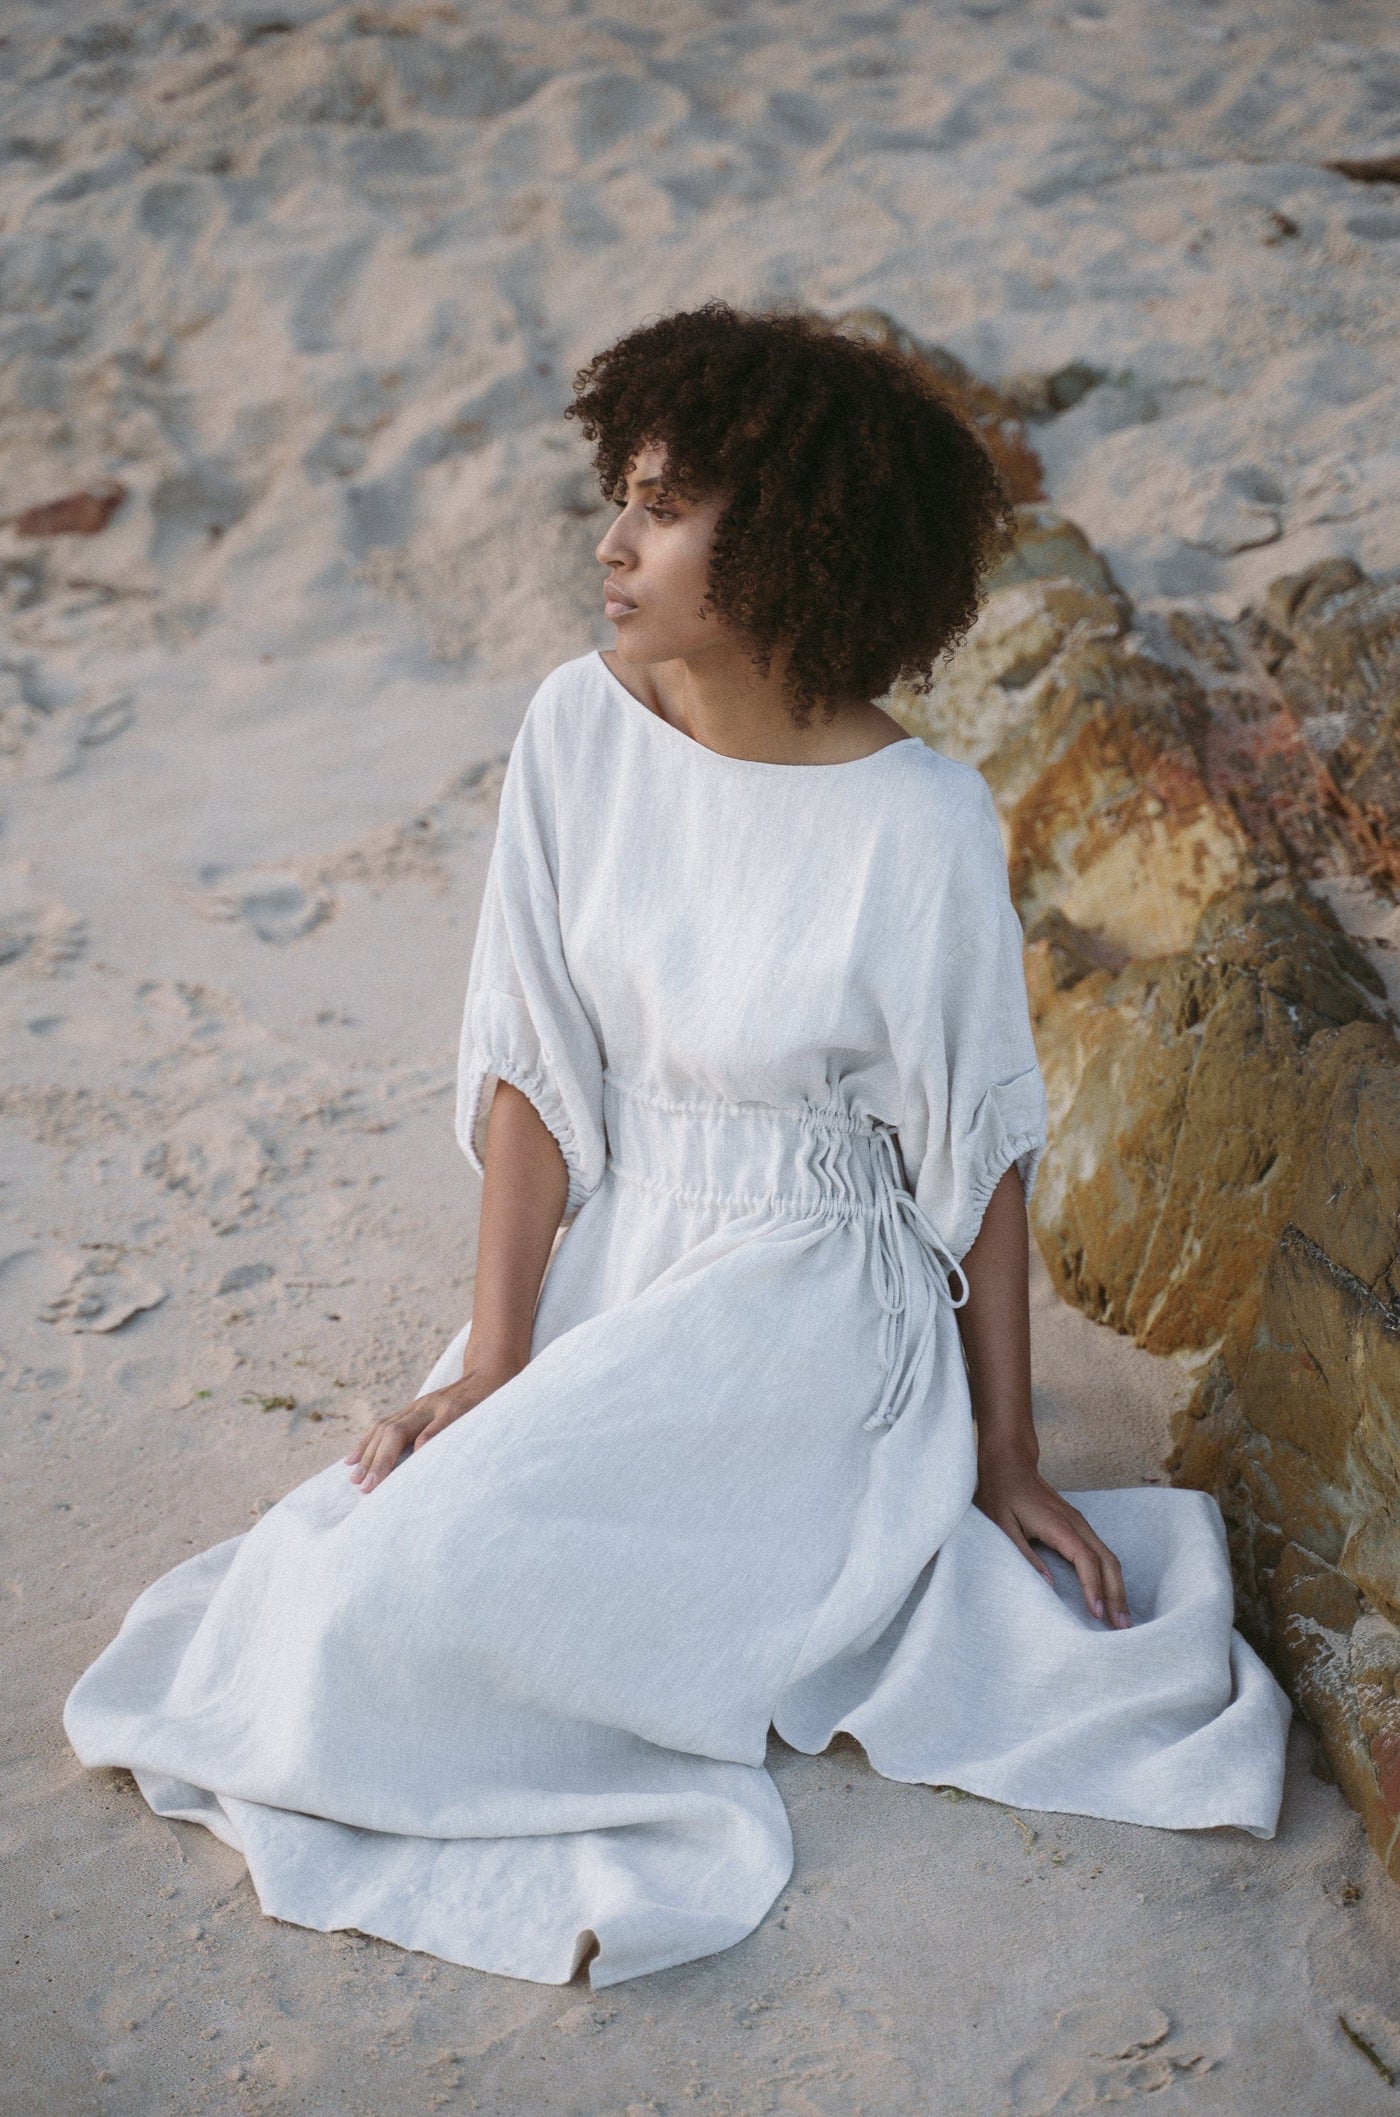 Lilly Pilly Collection Valerie dress made from 100% Organic linen in Oatmeal